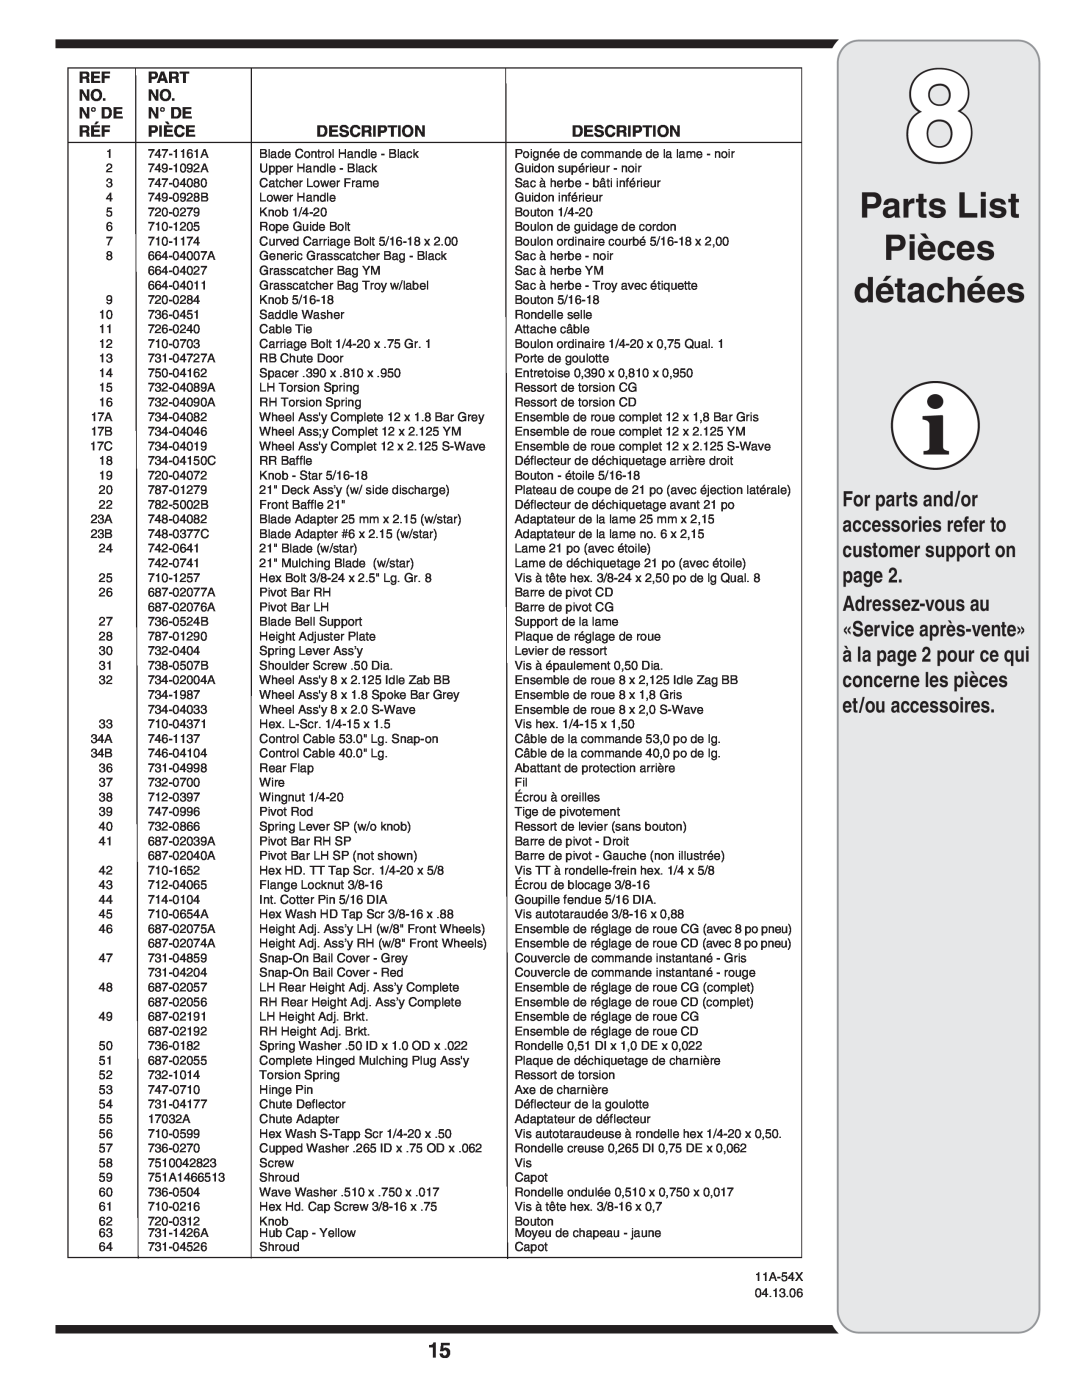 MTD 60-1622-0 warranty Parts List Pièces détachées, For parts and/or accessories refer to customer support on page 